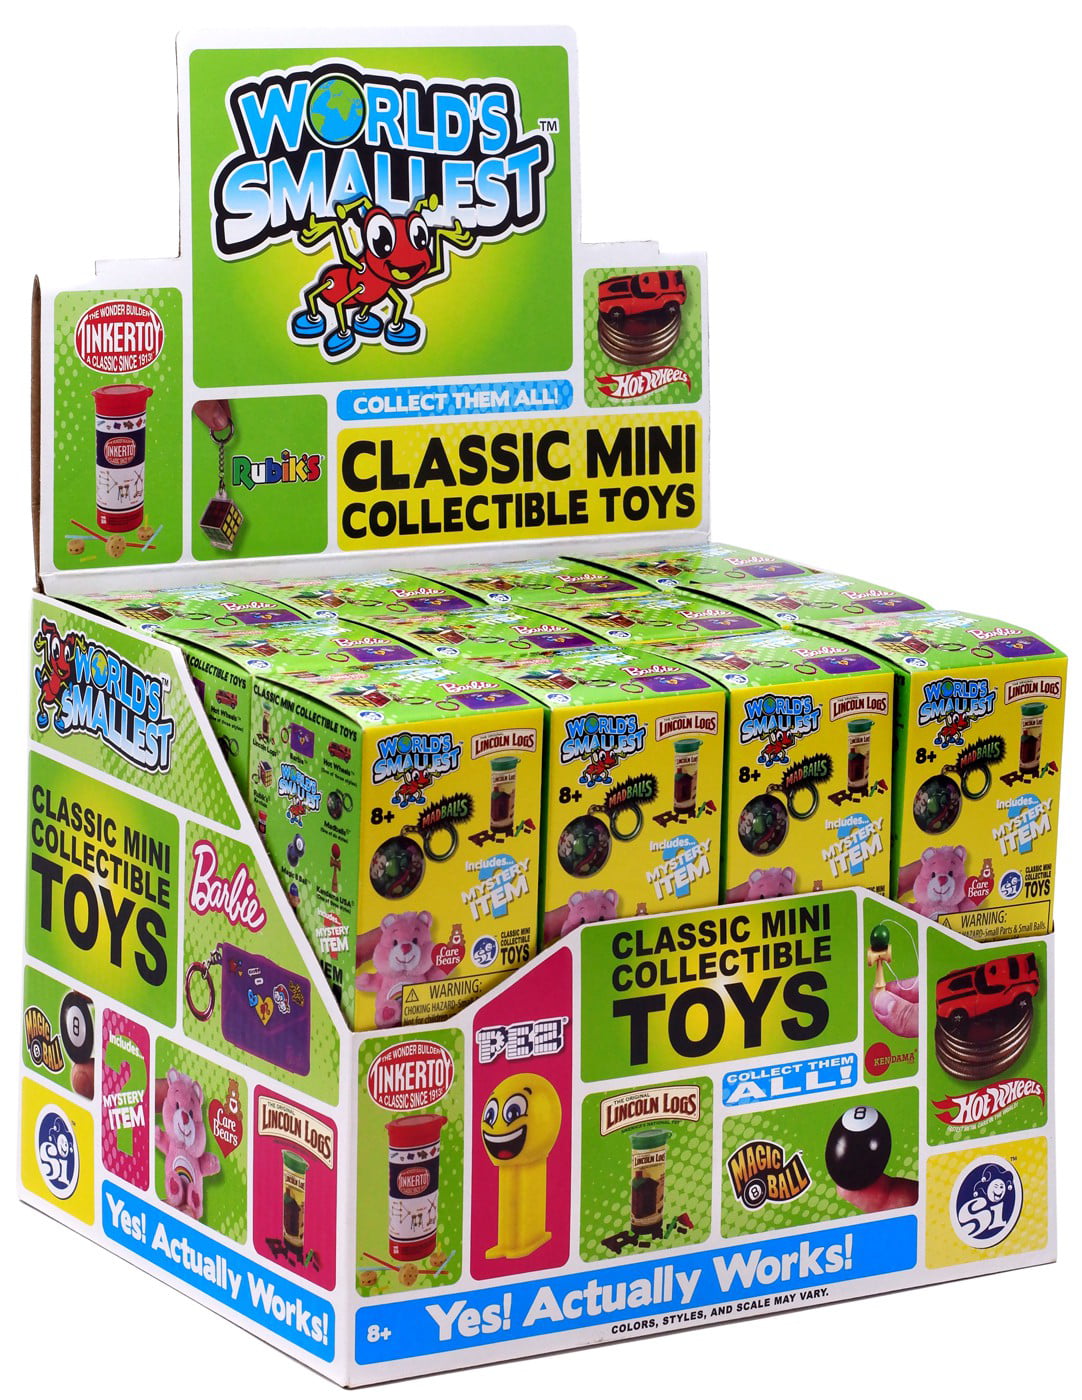 Classic Mini Collectible Toys Surprise Item Blind Bag for sale online World's Smallest 